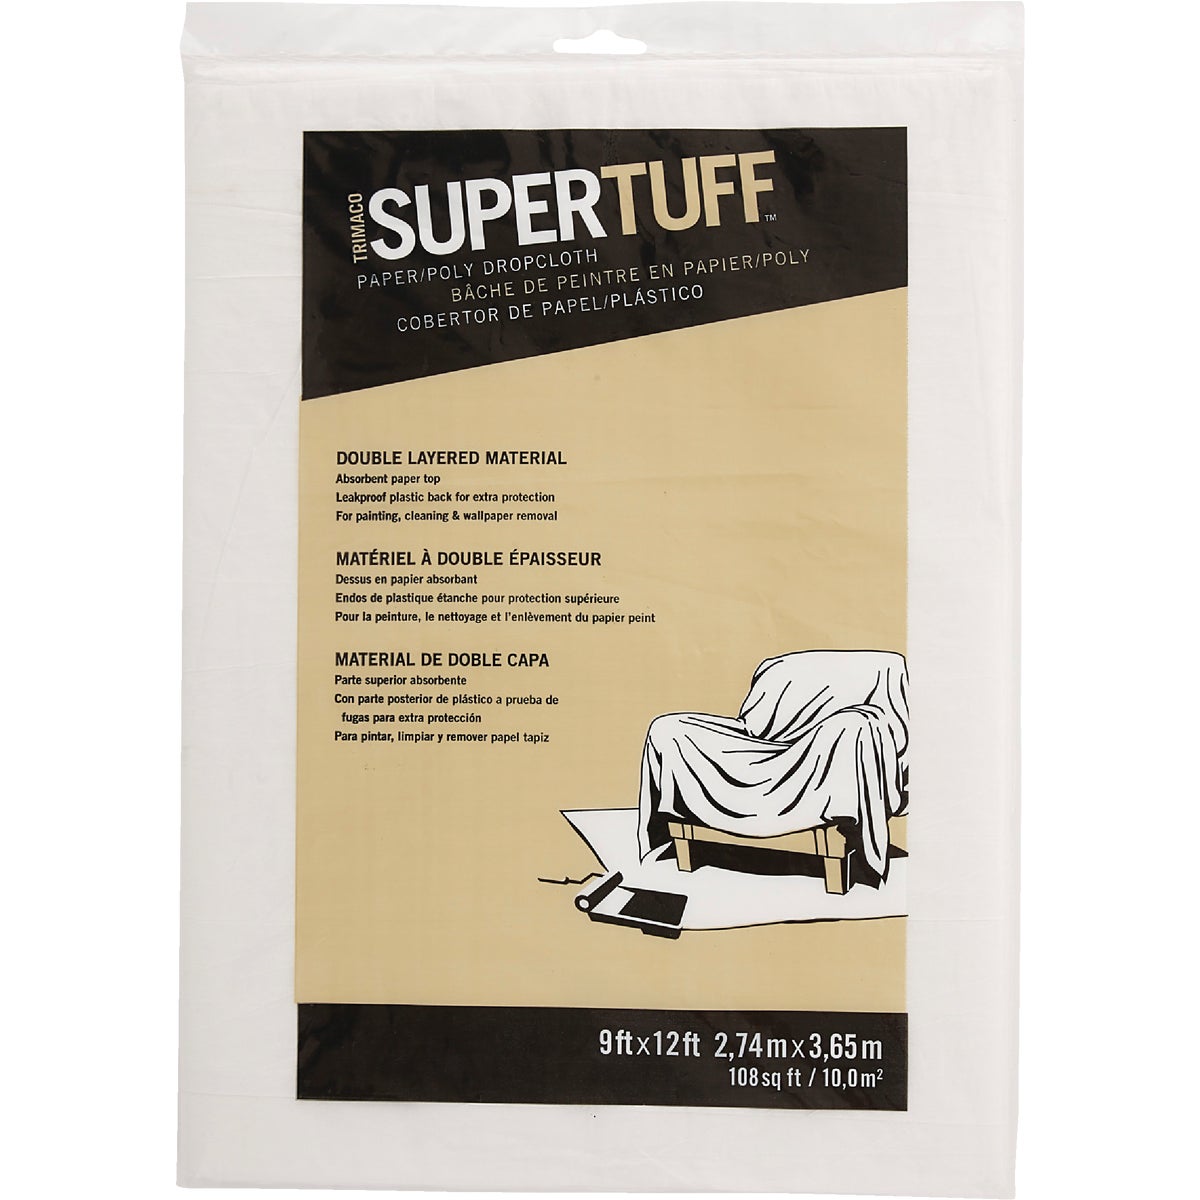 Item 770973, Trimaco's SuperTuff Paper/Poly drop cloth is made of white tissue laminated